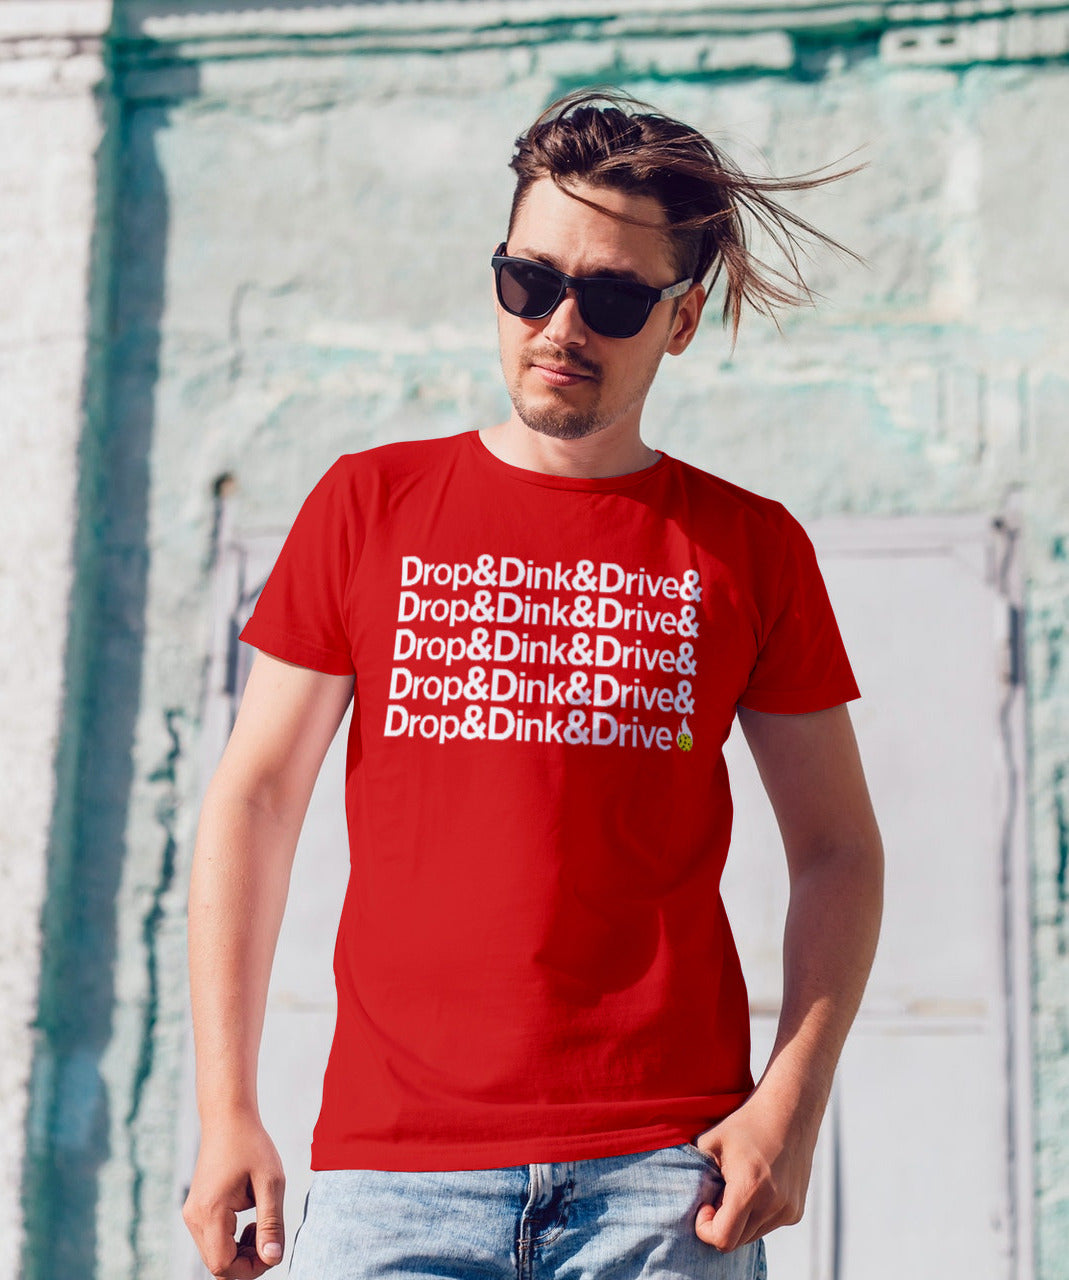 man with sunglasses on wearing red drop & dink & drive pickleball apparel shirt front view